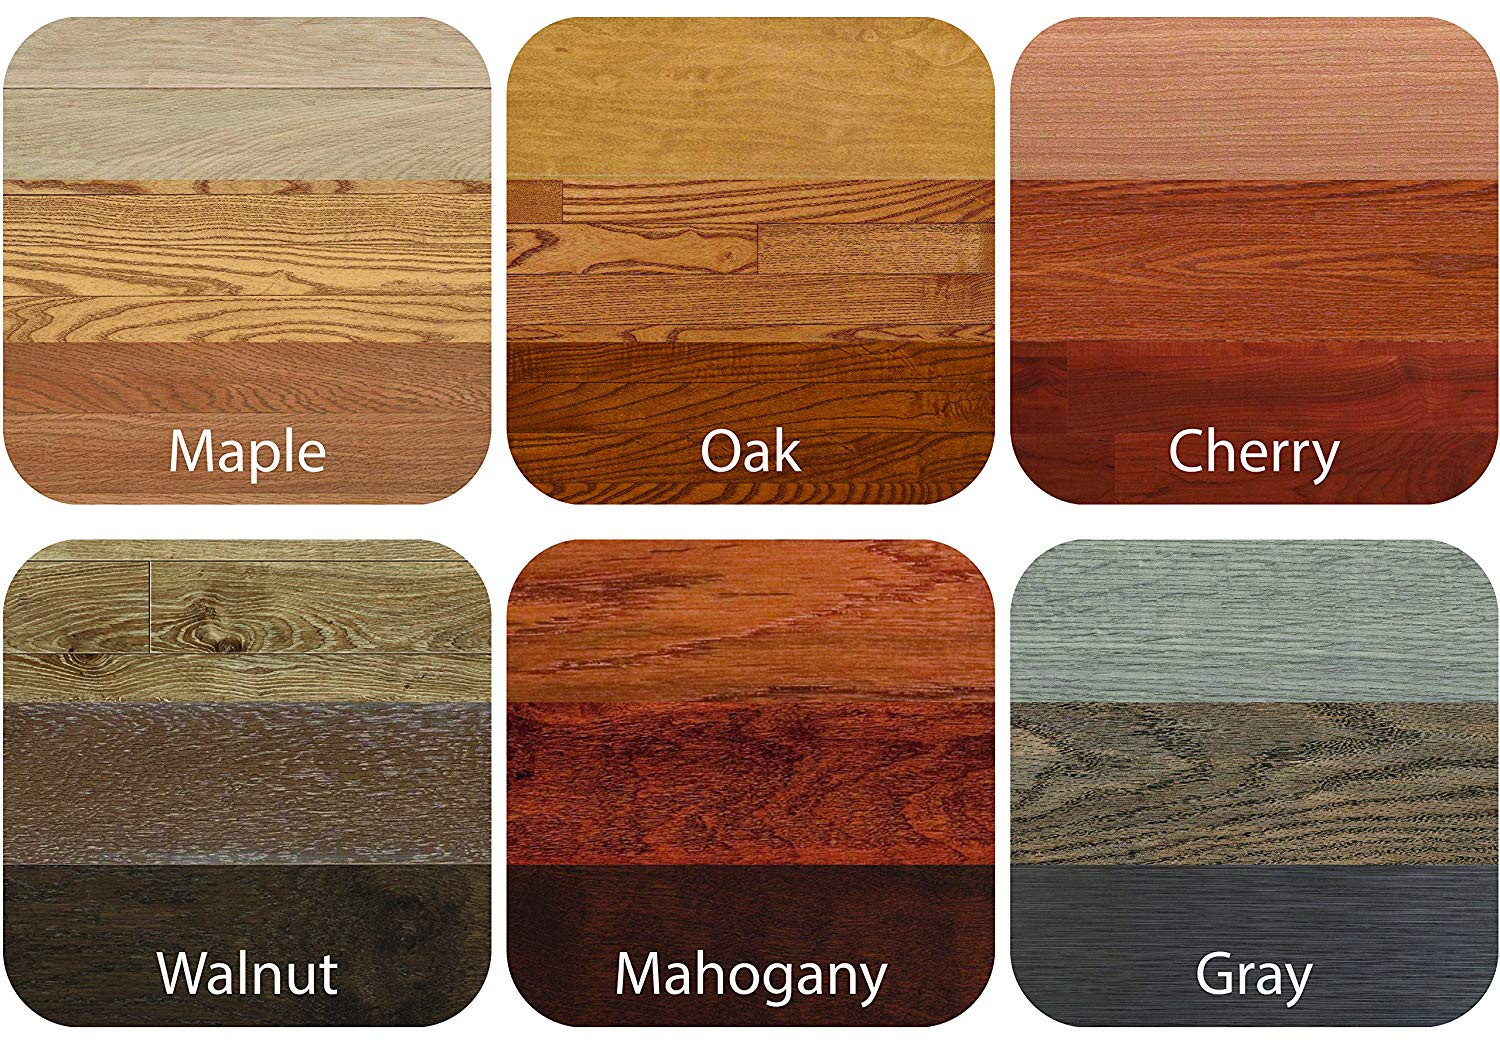 22 Great Hardwood Flooring Business Names 2024 free download hardwood flooring business names of cal flor pe49402cf scratchcure 3 shade double tipped repair pen for in cal flor pe49402cf scratchcure 3 shade double tipped repair pen for use on wood lam